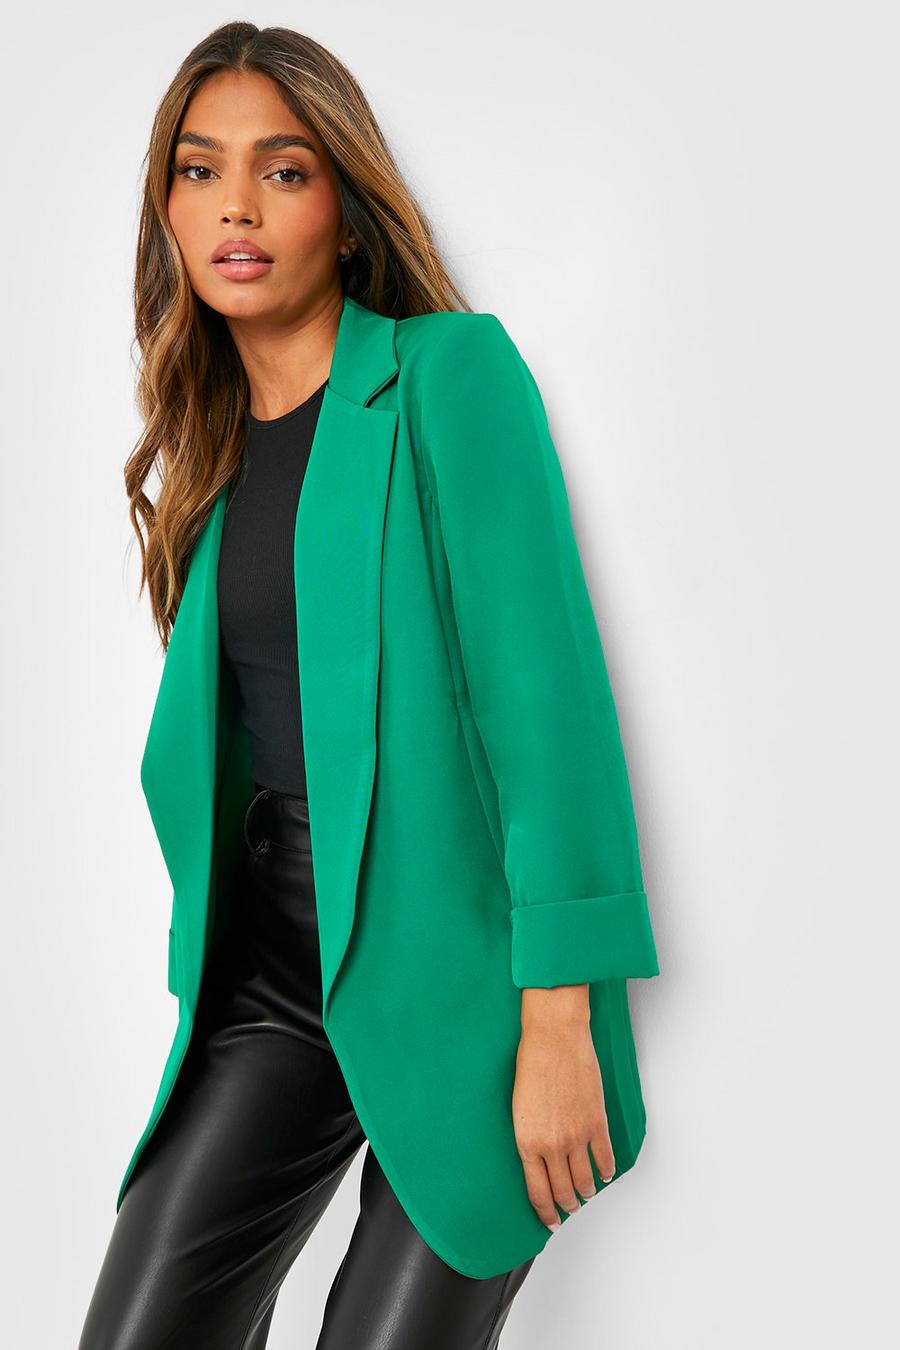 Bright green Basic Woven vintage Cuff Relaxed Fit Blazer